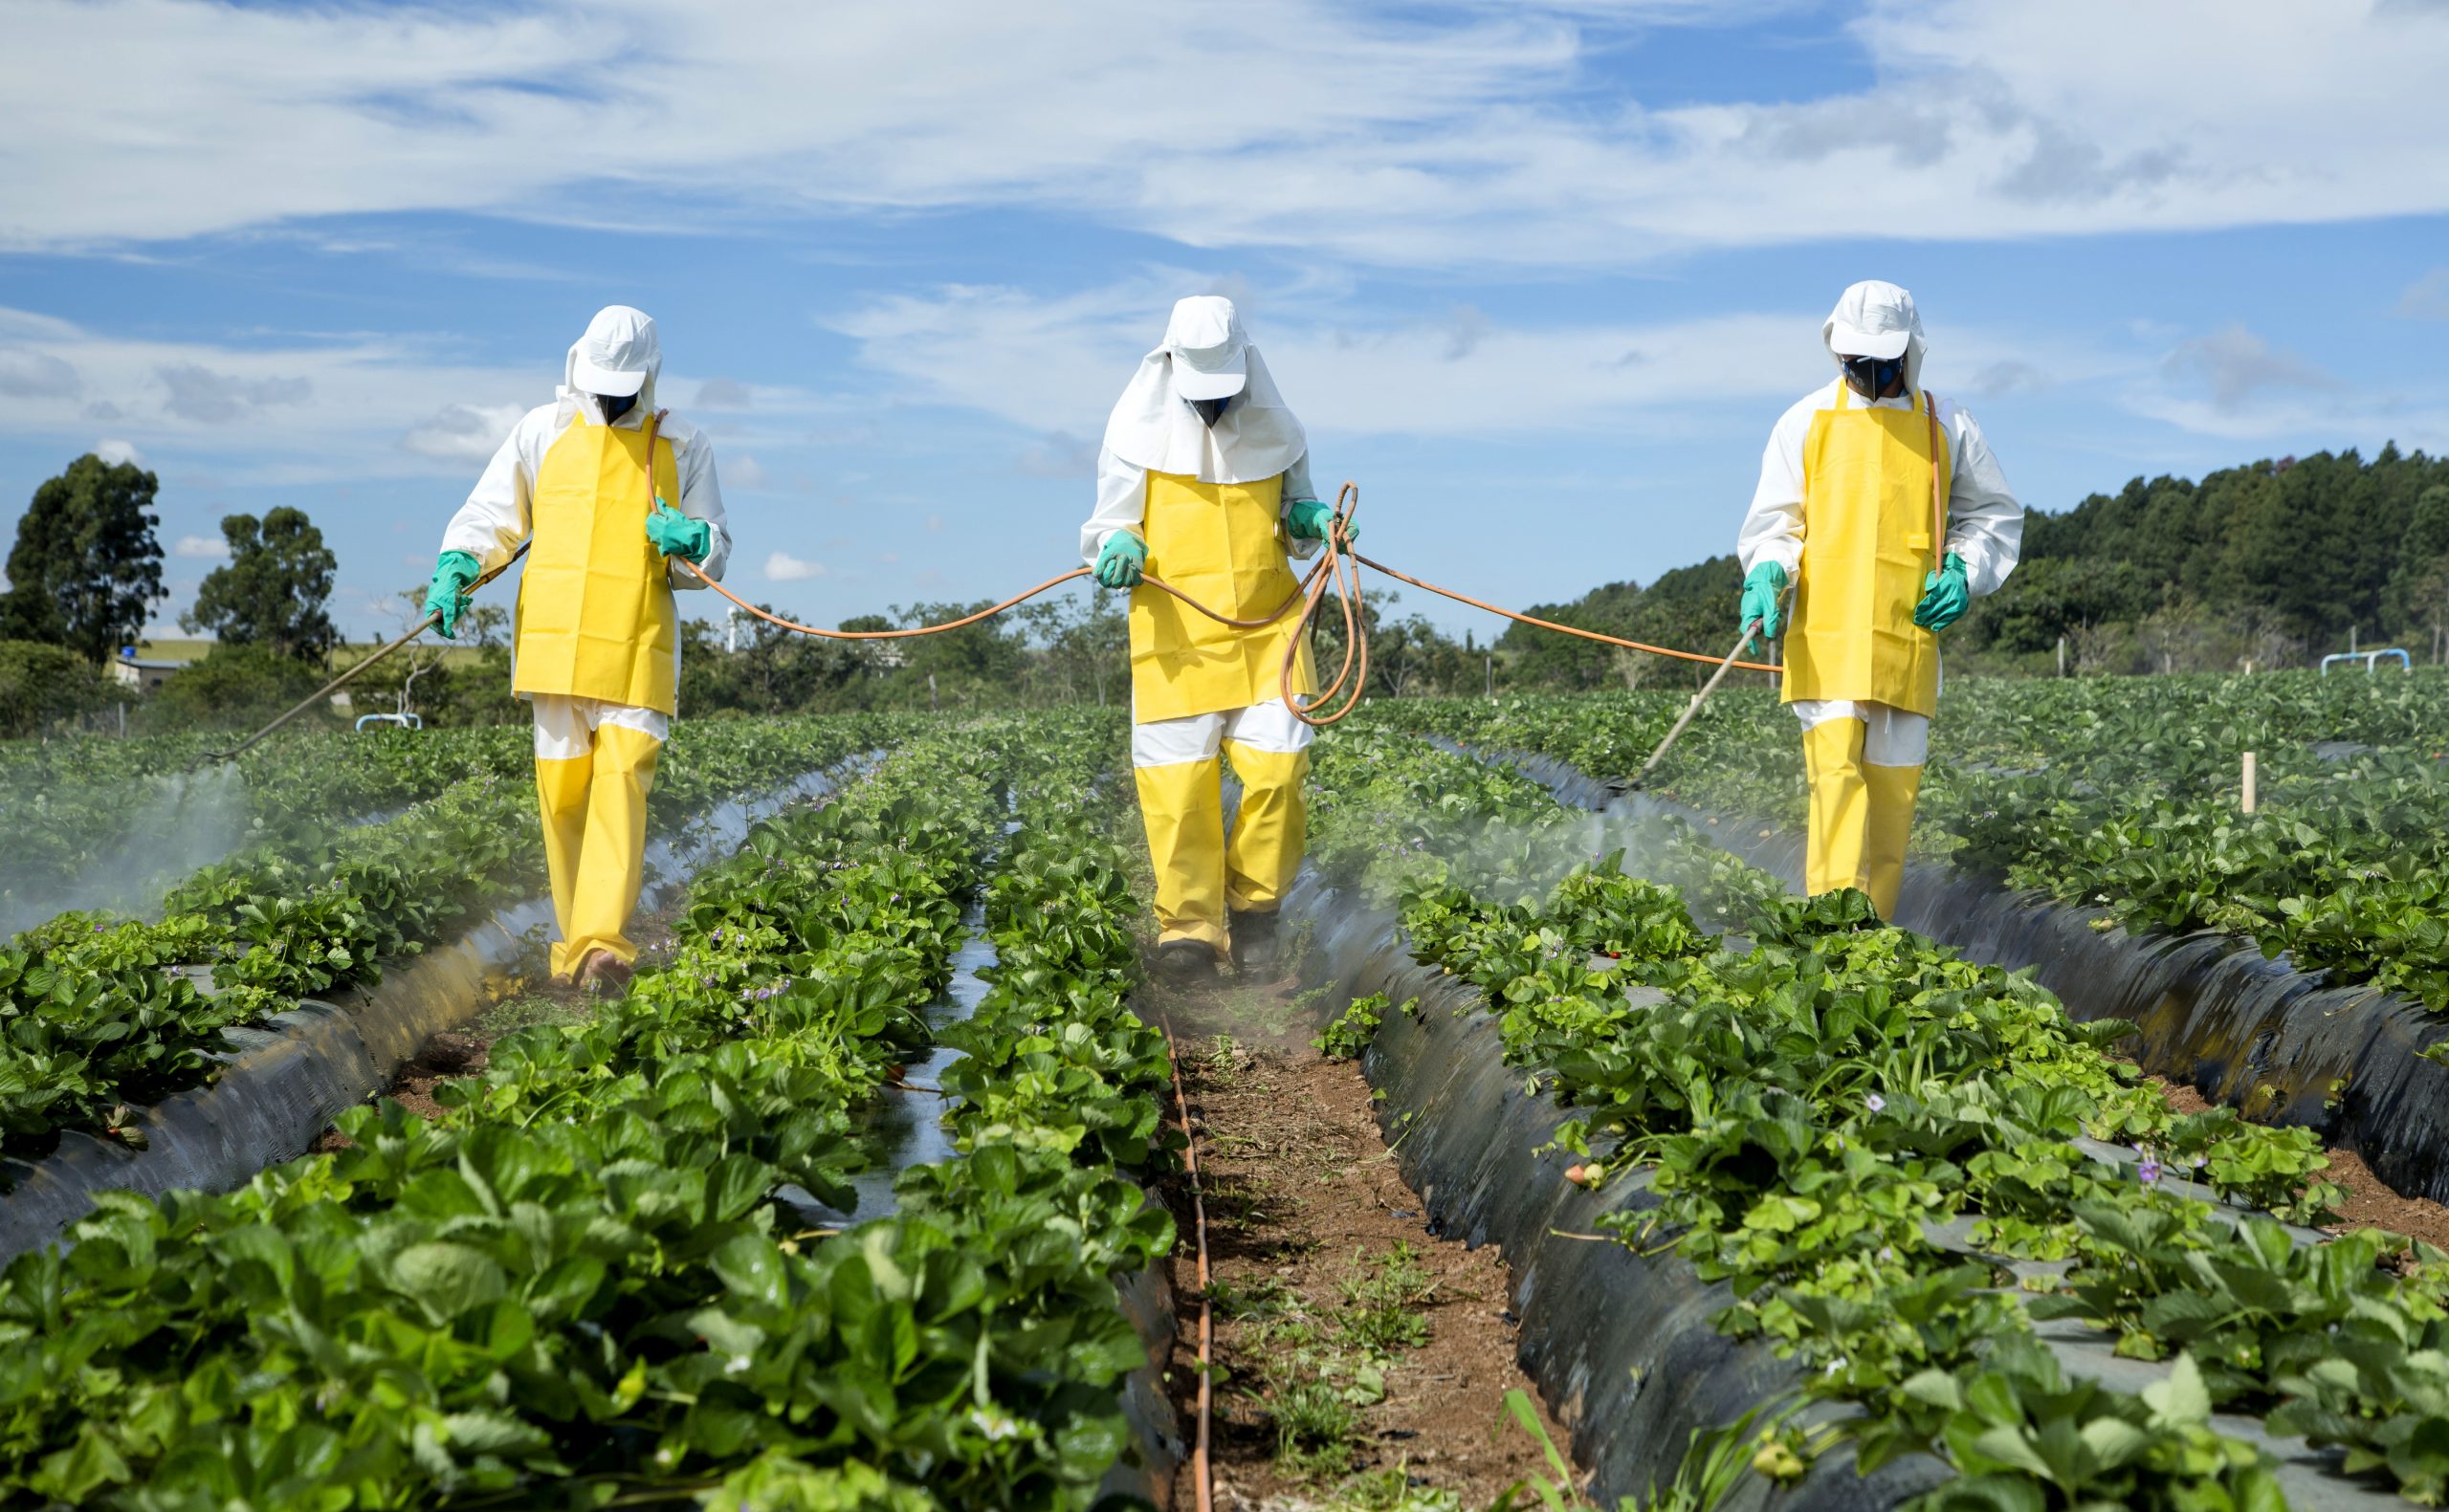 Three men wearing a white and yellow coat with their faces covered spraying chemical pesticides on a farm field